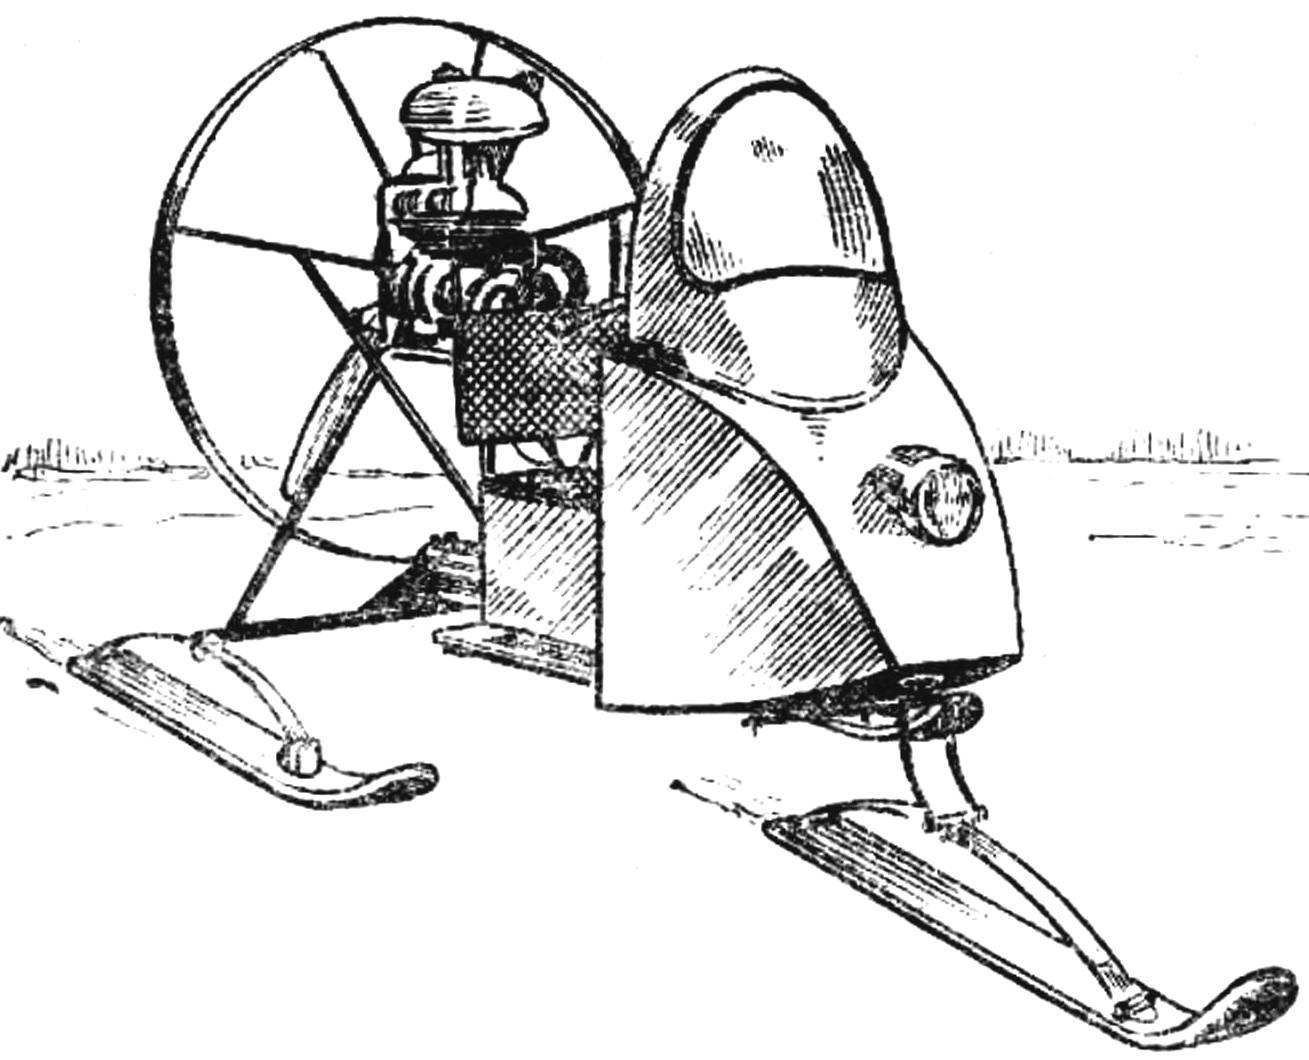 SLED WITH A PROPELLER